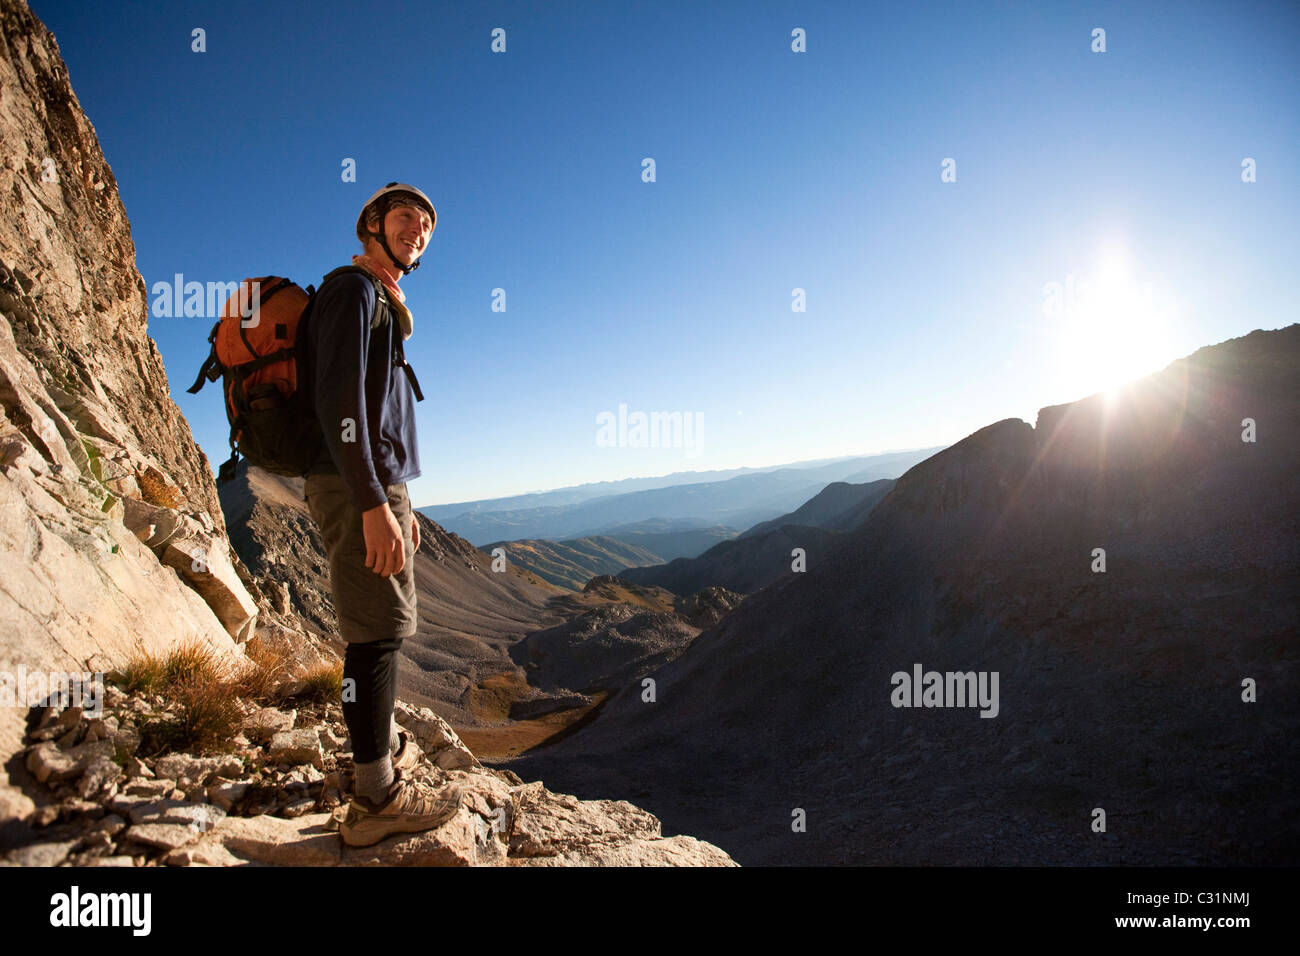 A young man smiles as the sunrises on his mountain climb. Stock Photo